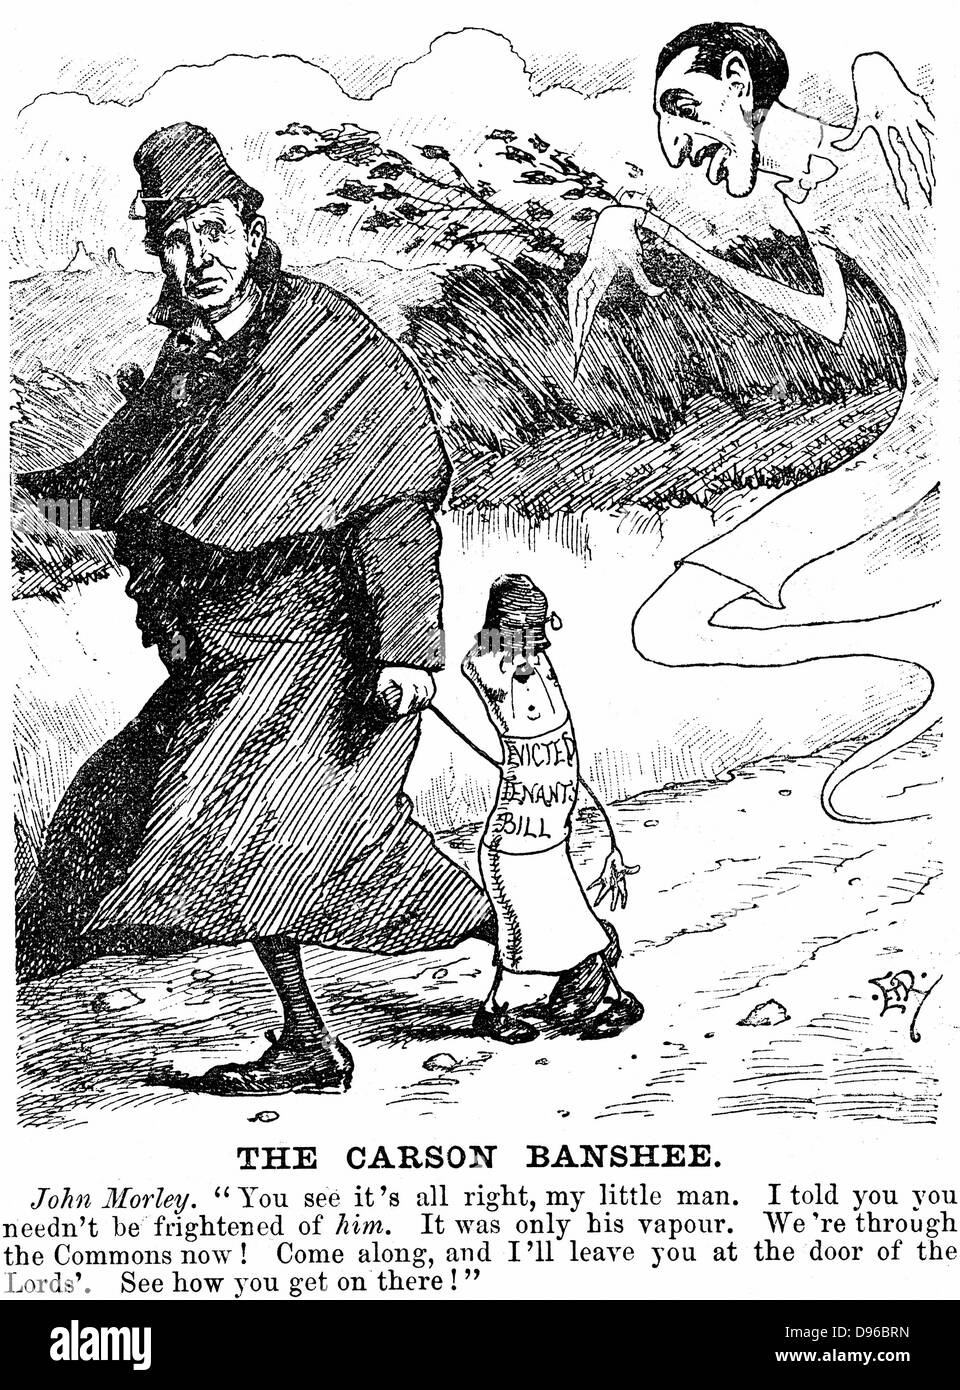 John Morley (1838-1923) British Secretary for Ireland, holding the hand of the Evicted Tenant Bill he has shepherded through House of Commons, telling it not to be frightened of Edward Carson (1854-1935) Cartoon from 'Punch', London, 11 August 1894. Stock Photo